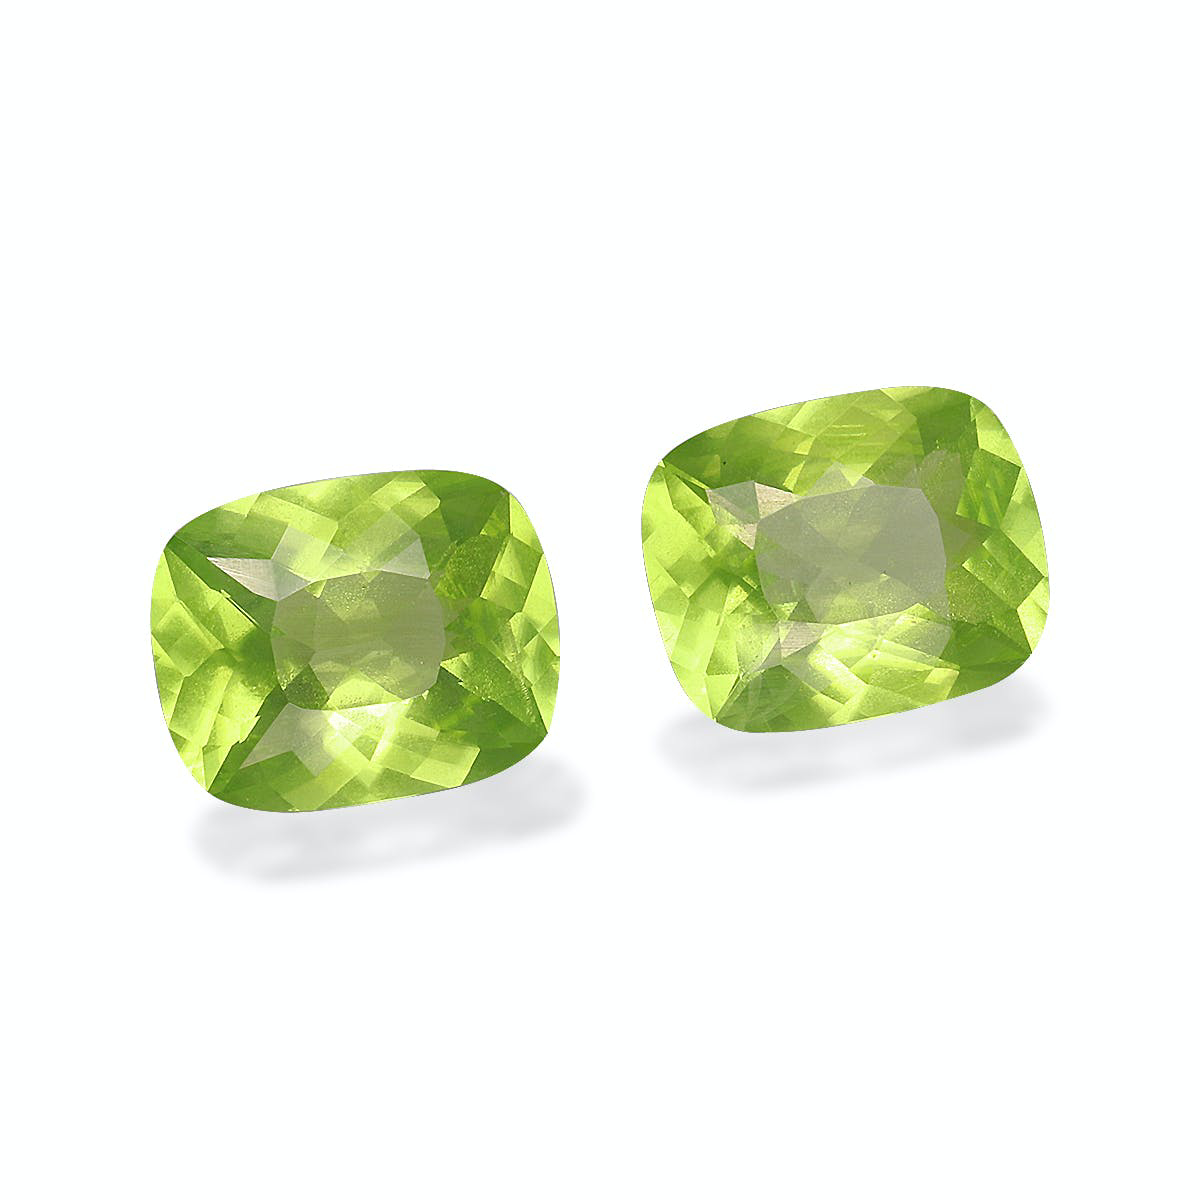 Picture of Lime Green Peridot 5.71ct - 10x8mm Pair (PD0138)